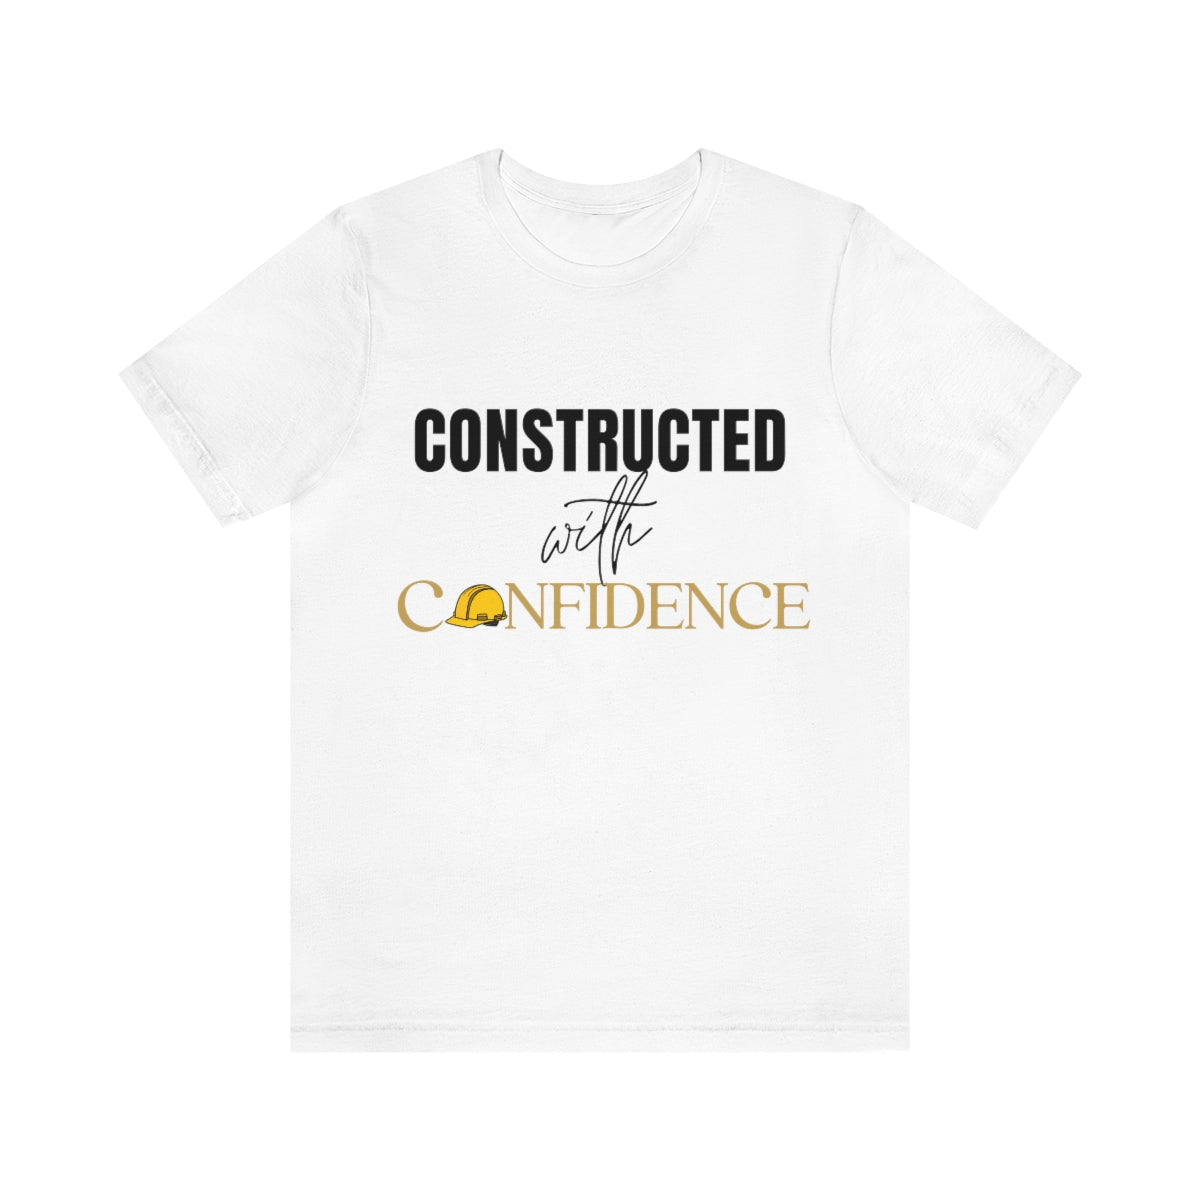 Constructed with confidence hard hat edition